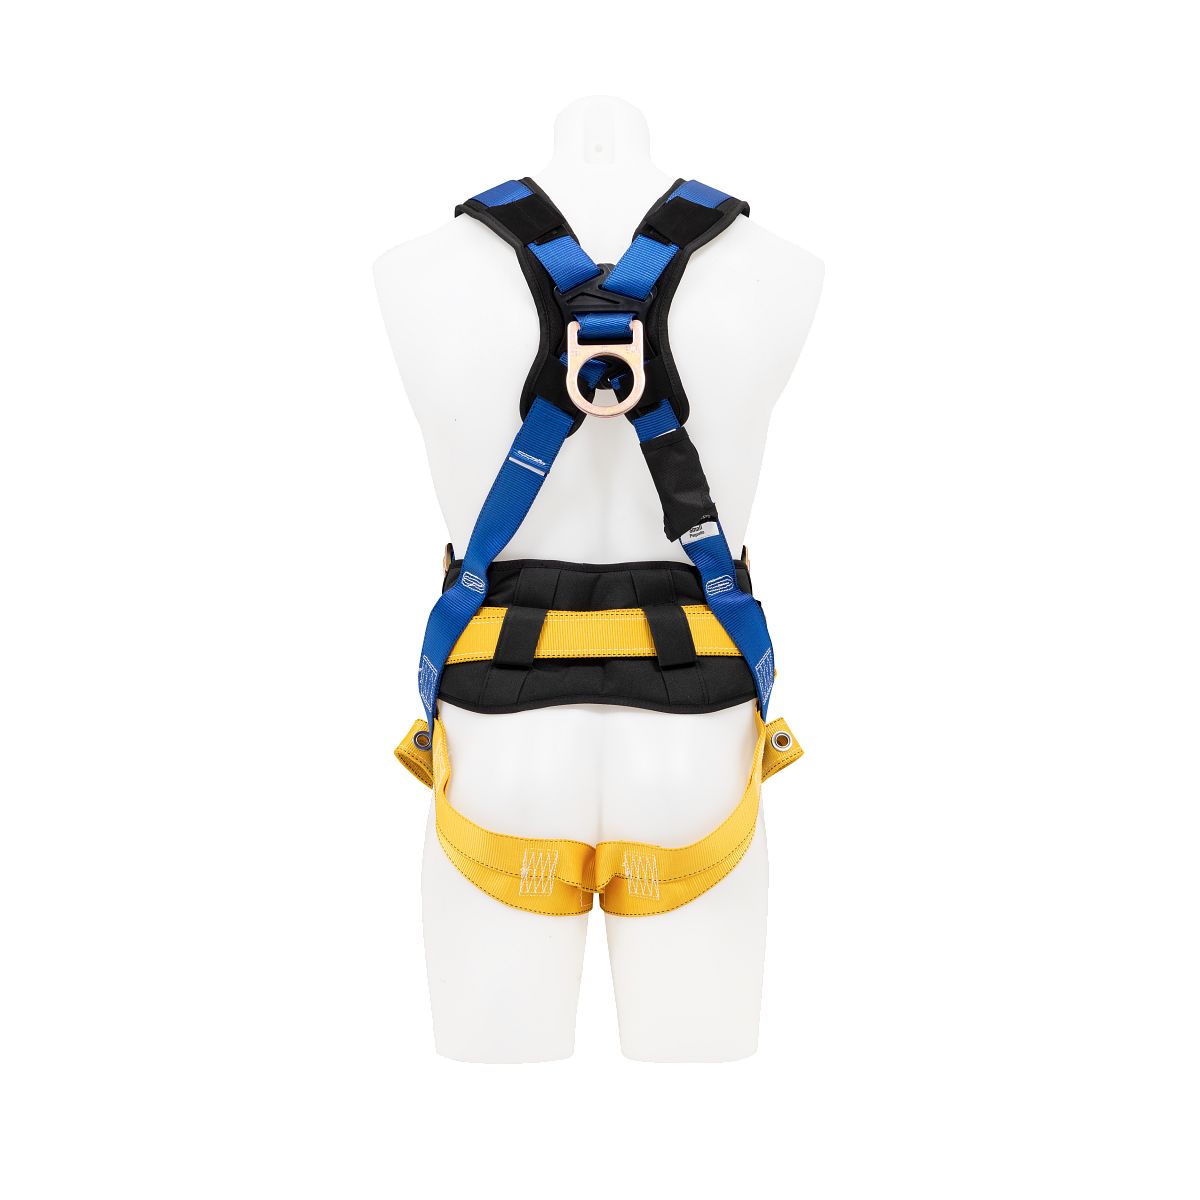 Werner BaseWear Construction Harness from GME Supply